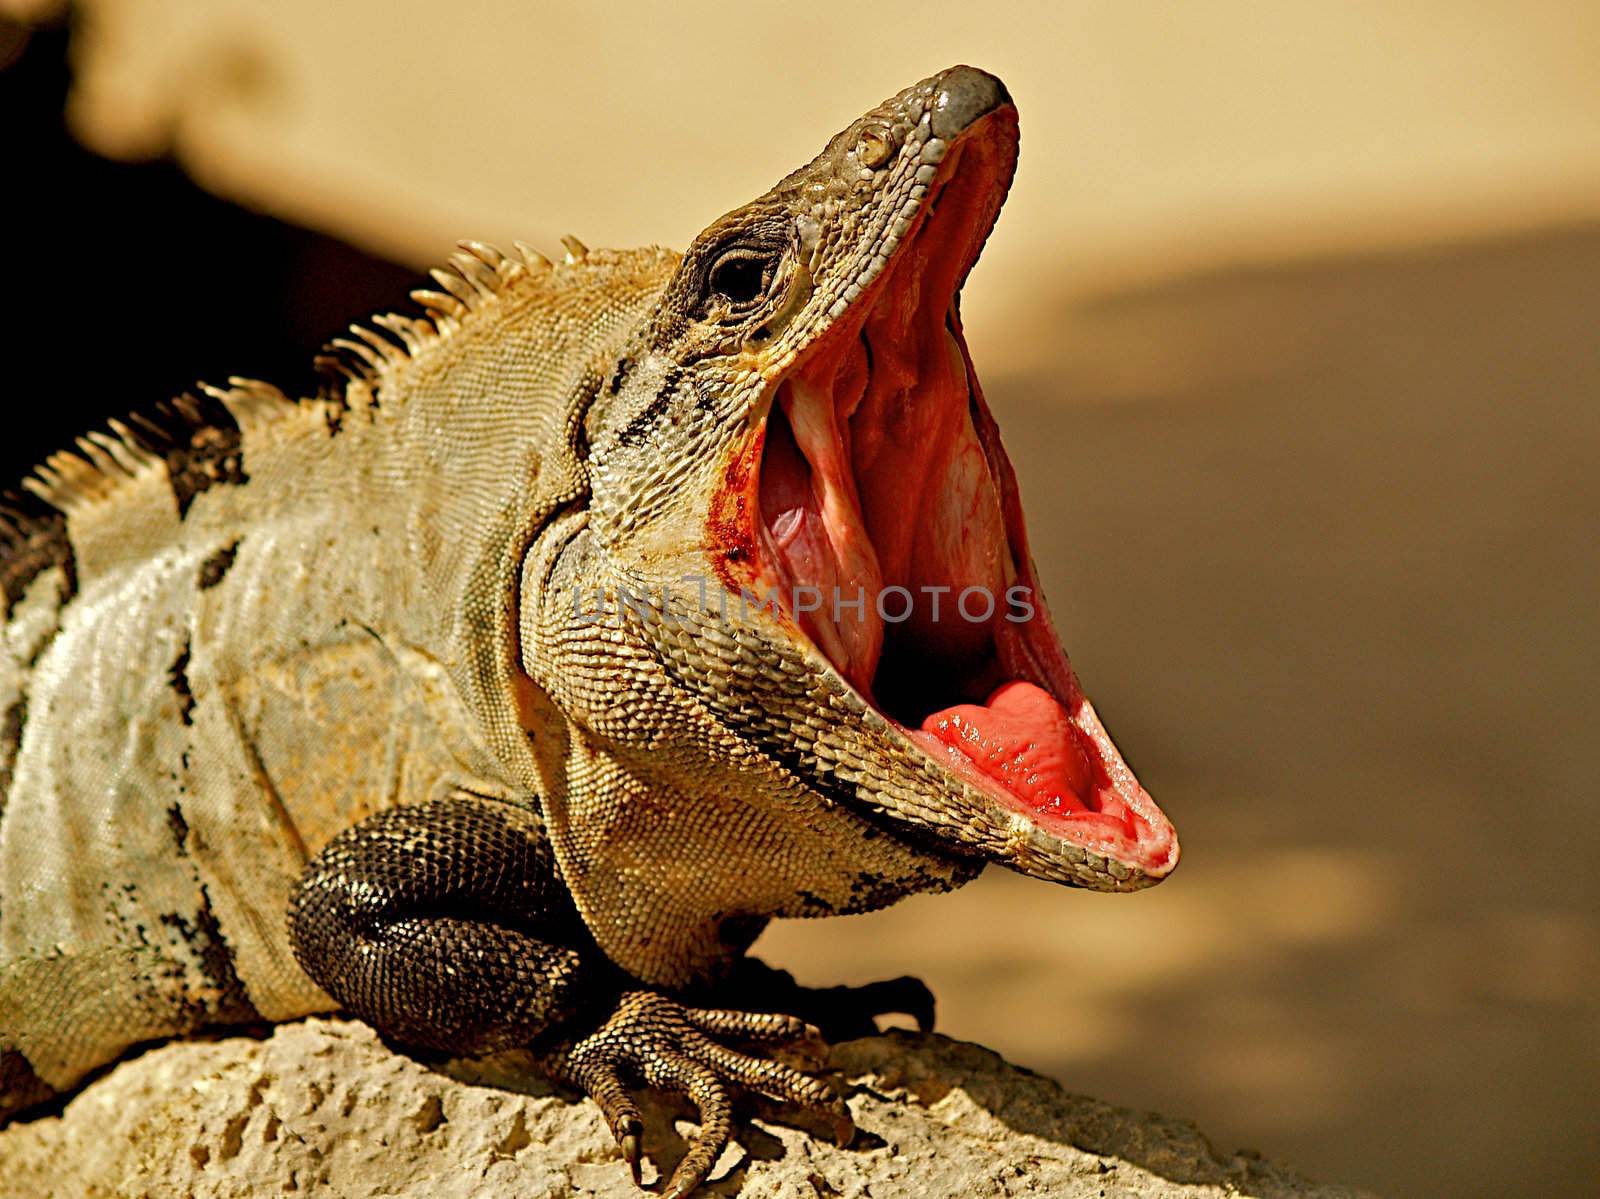 Open mouthed iguana by dmvphotos